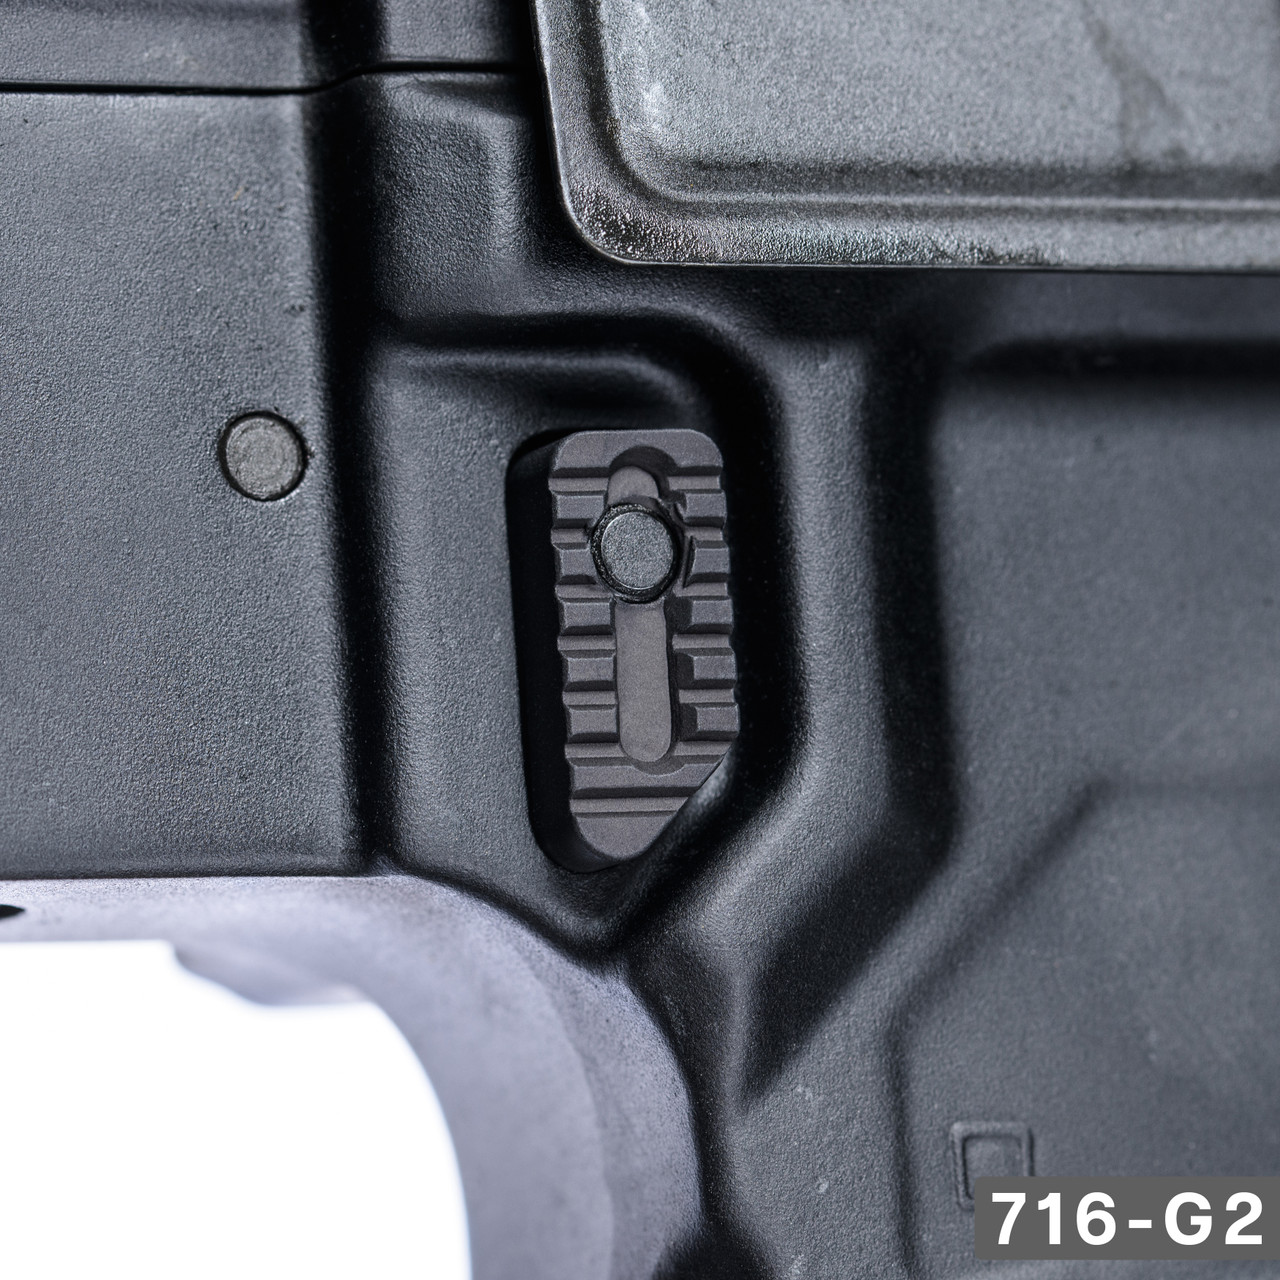 How Does a Magazine Release Button Work on an AR-15? - RailScales LLC